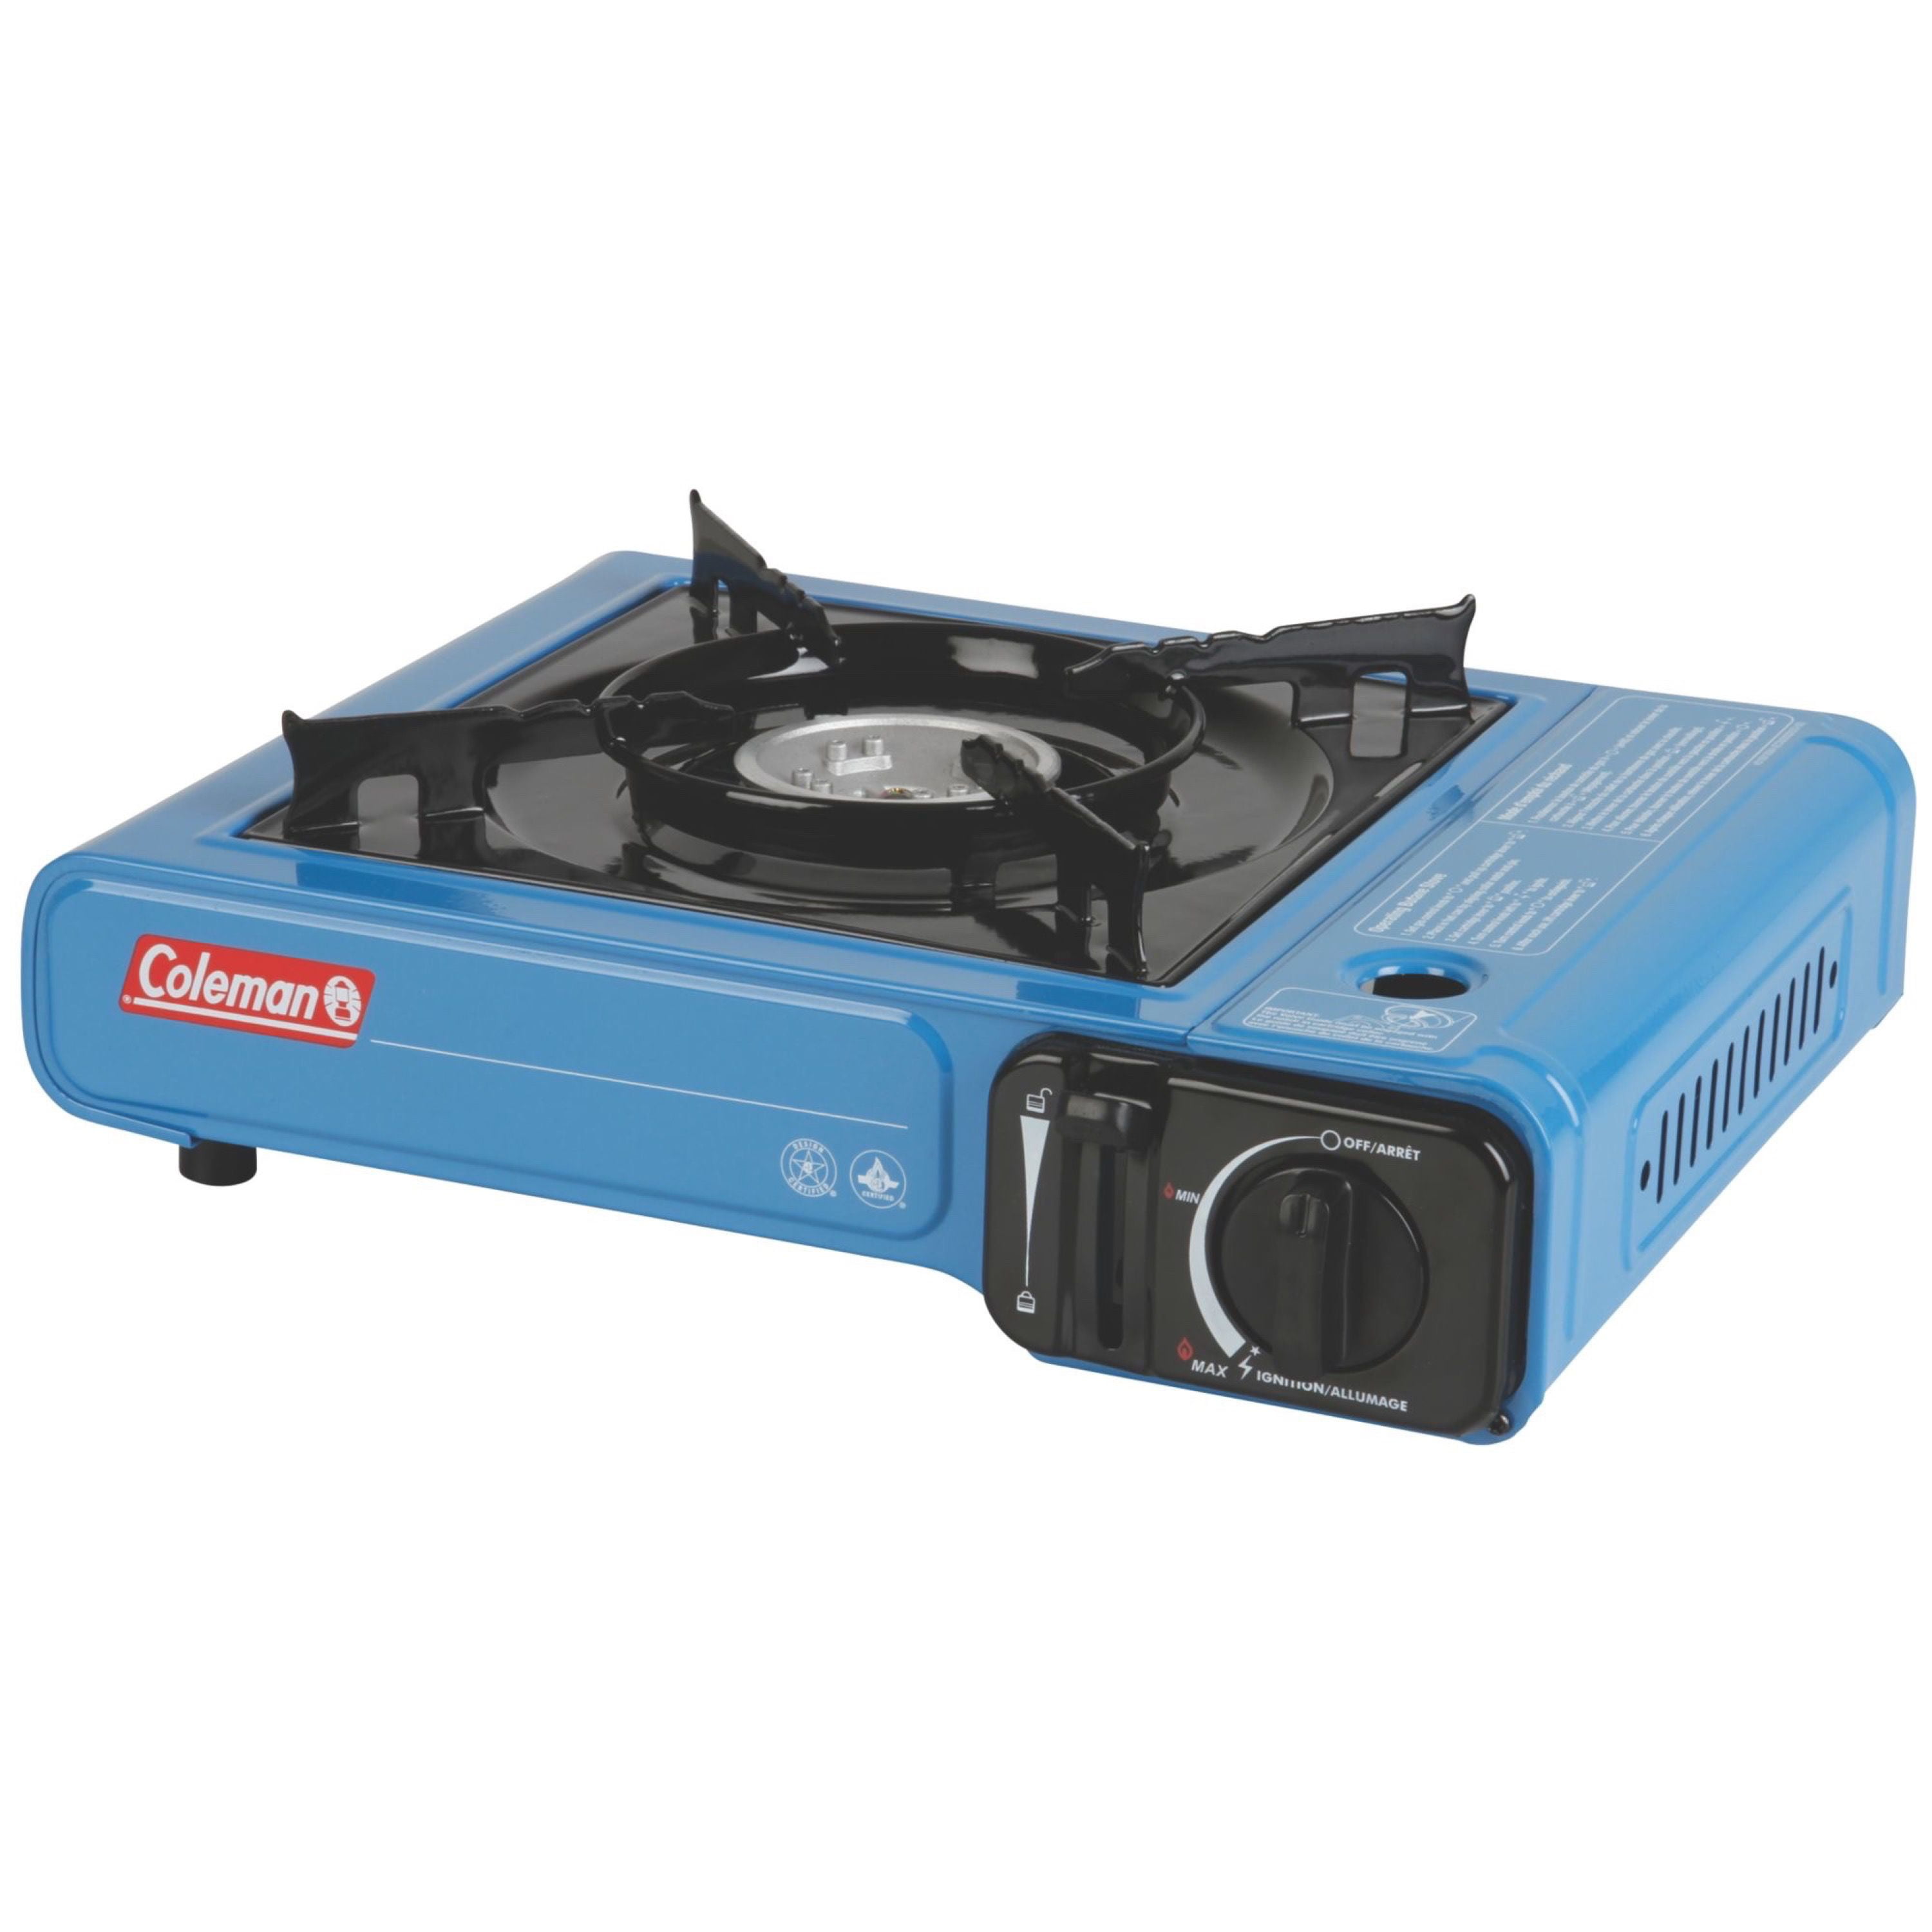 Coleman Gas Camping Stove | 4 in 1 Portable Propane Cooking System